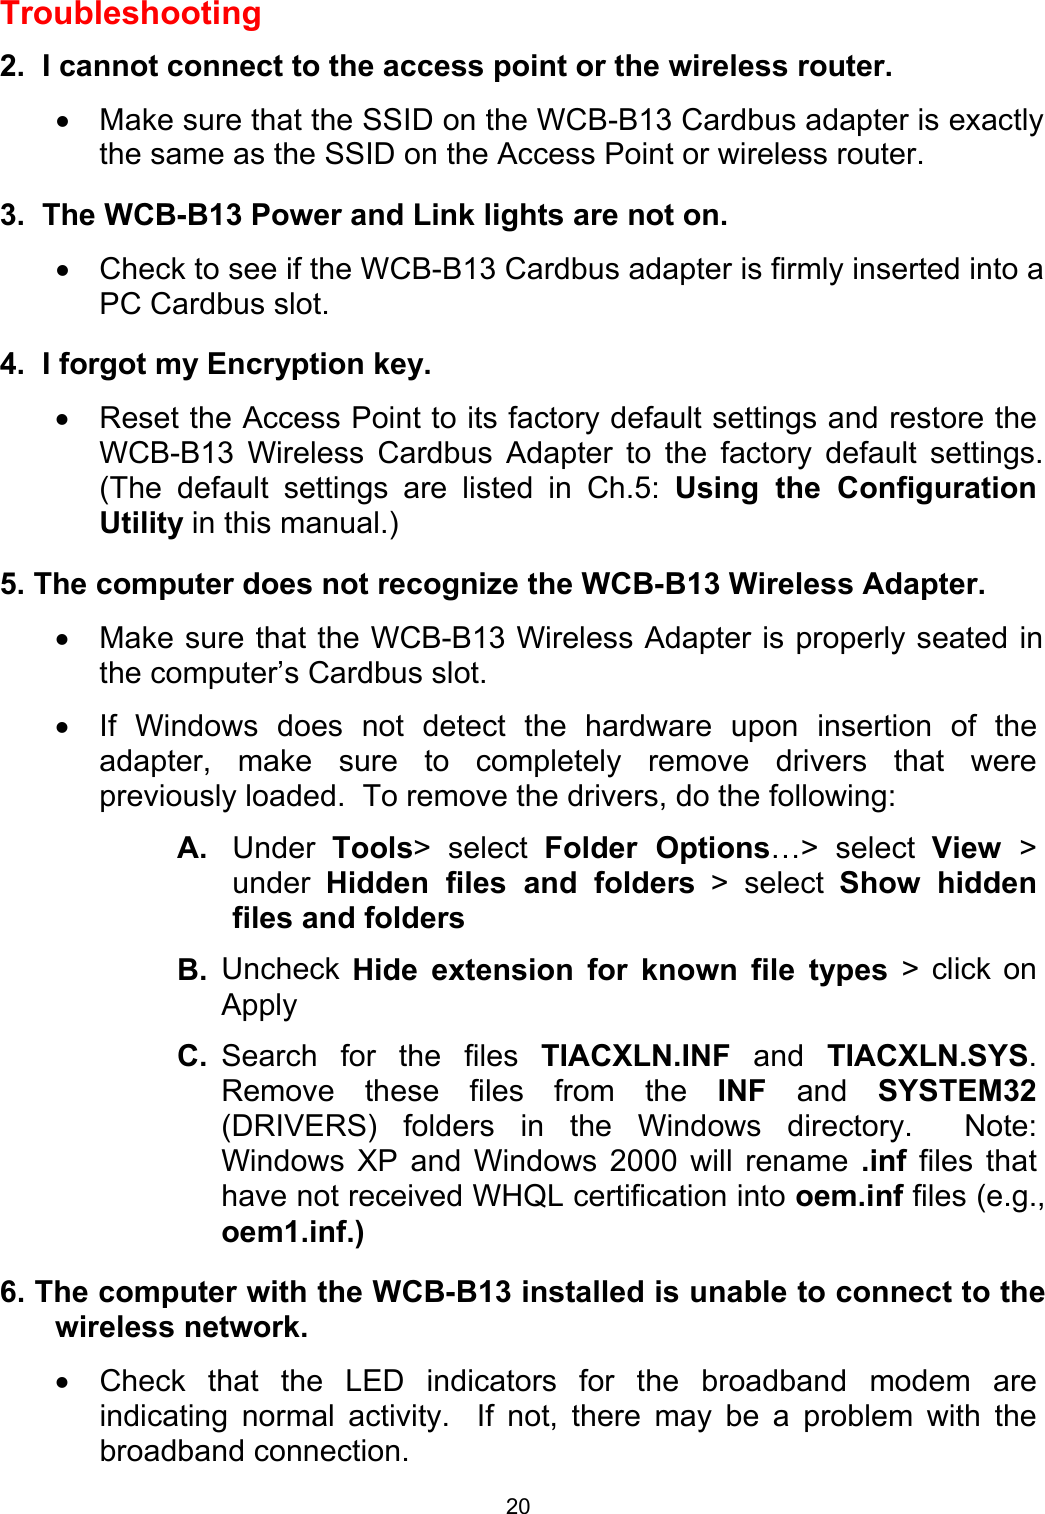  20Troubleshooting  2.  I cannot connect to the access point or the wireless router. •  Make sure that the SSID on the WCB-B13 Cardbus adapter is exactly the same as the SSID on the Access Point or wireless router.  3.  The WCB-B13 Power and Link lights are not on. •  Check to see if the WCB-B13 Cardbus adapter is firmly inserted into a PC Cardbus slot.  4.  I forgot my Encryption key. •  Reset the Access Point to its factory default settings and restore the WCB-B13 Wireless Cardbus Adapter to the factory default settings. (The default settings are listed in Ch.5: Using the Configuration Utility in this manual.)  5. The computer does not recognize the WCB-B13 Wireless Adapter. •  Make sure that the WCB-B13 Wireless Adapter is properly seated in the computer’s Cardbus slot. •  If Windows does not detect the hardware upon insertion of the adapter, make sure to completely remove drivers that were previously loaded.  To remove the drivers, do the following: A.  Under  Tools&gt; select Folder Options…&gt; select View  &gt; under  Hidden files and folders &gt; select Show hidden files and folders B.  Uncheck  Hide extension for known file types &gt; click on Apply C.  Search for the files TIACXLN.INF and TIACXLN.SYS. Remove these files from the INF and SYSTEM32 (DRIVERS) folders in the Windows directory.  Note:  Windows XP and Windows 2000 will rename .inf files that have not received WHQL certification into oem.inf files (e.g., oem1.inf.)  6. The computer with the WCB-B13 installed is unable to connect to the wireless network. •  Check that the LED indicators for the broadband modem are indicating normal activity.  If not, there may be a problem with the broadband connection. 